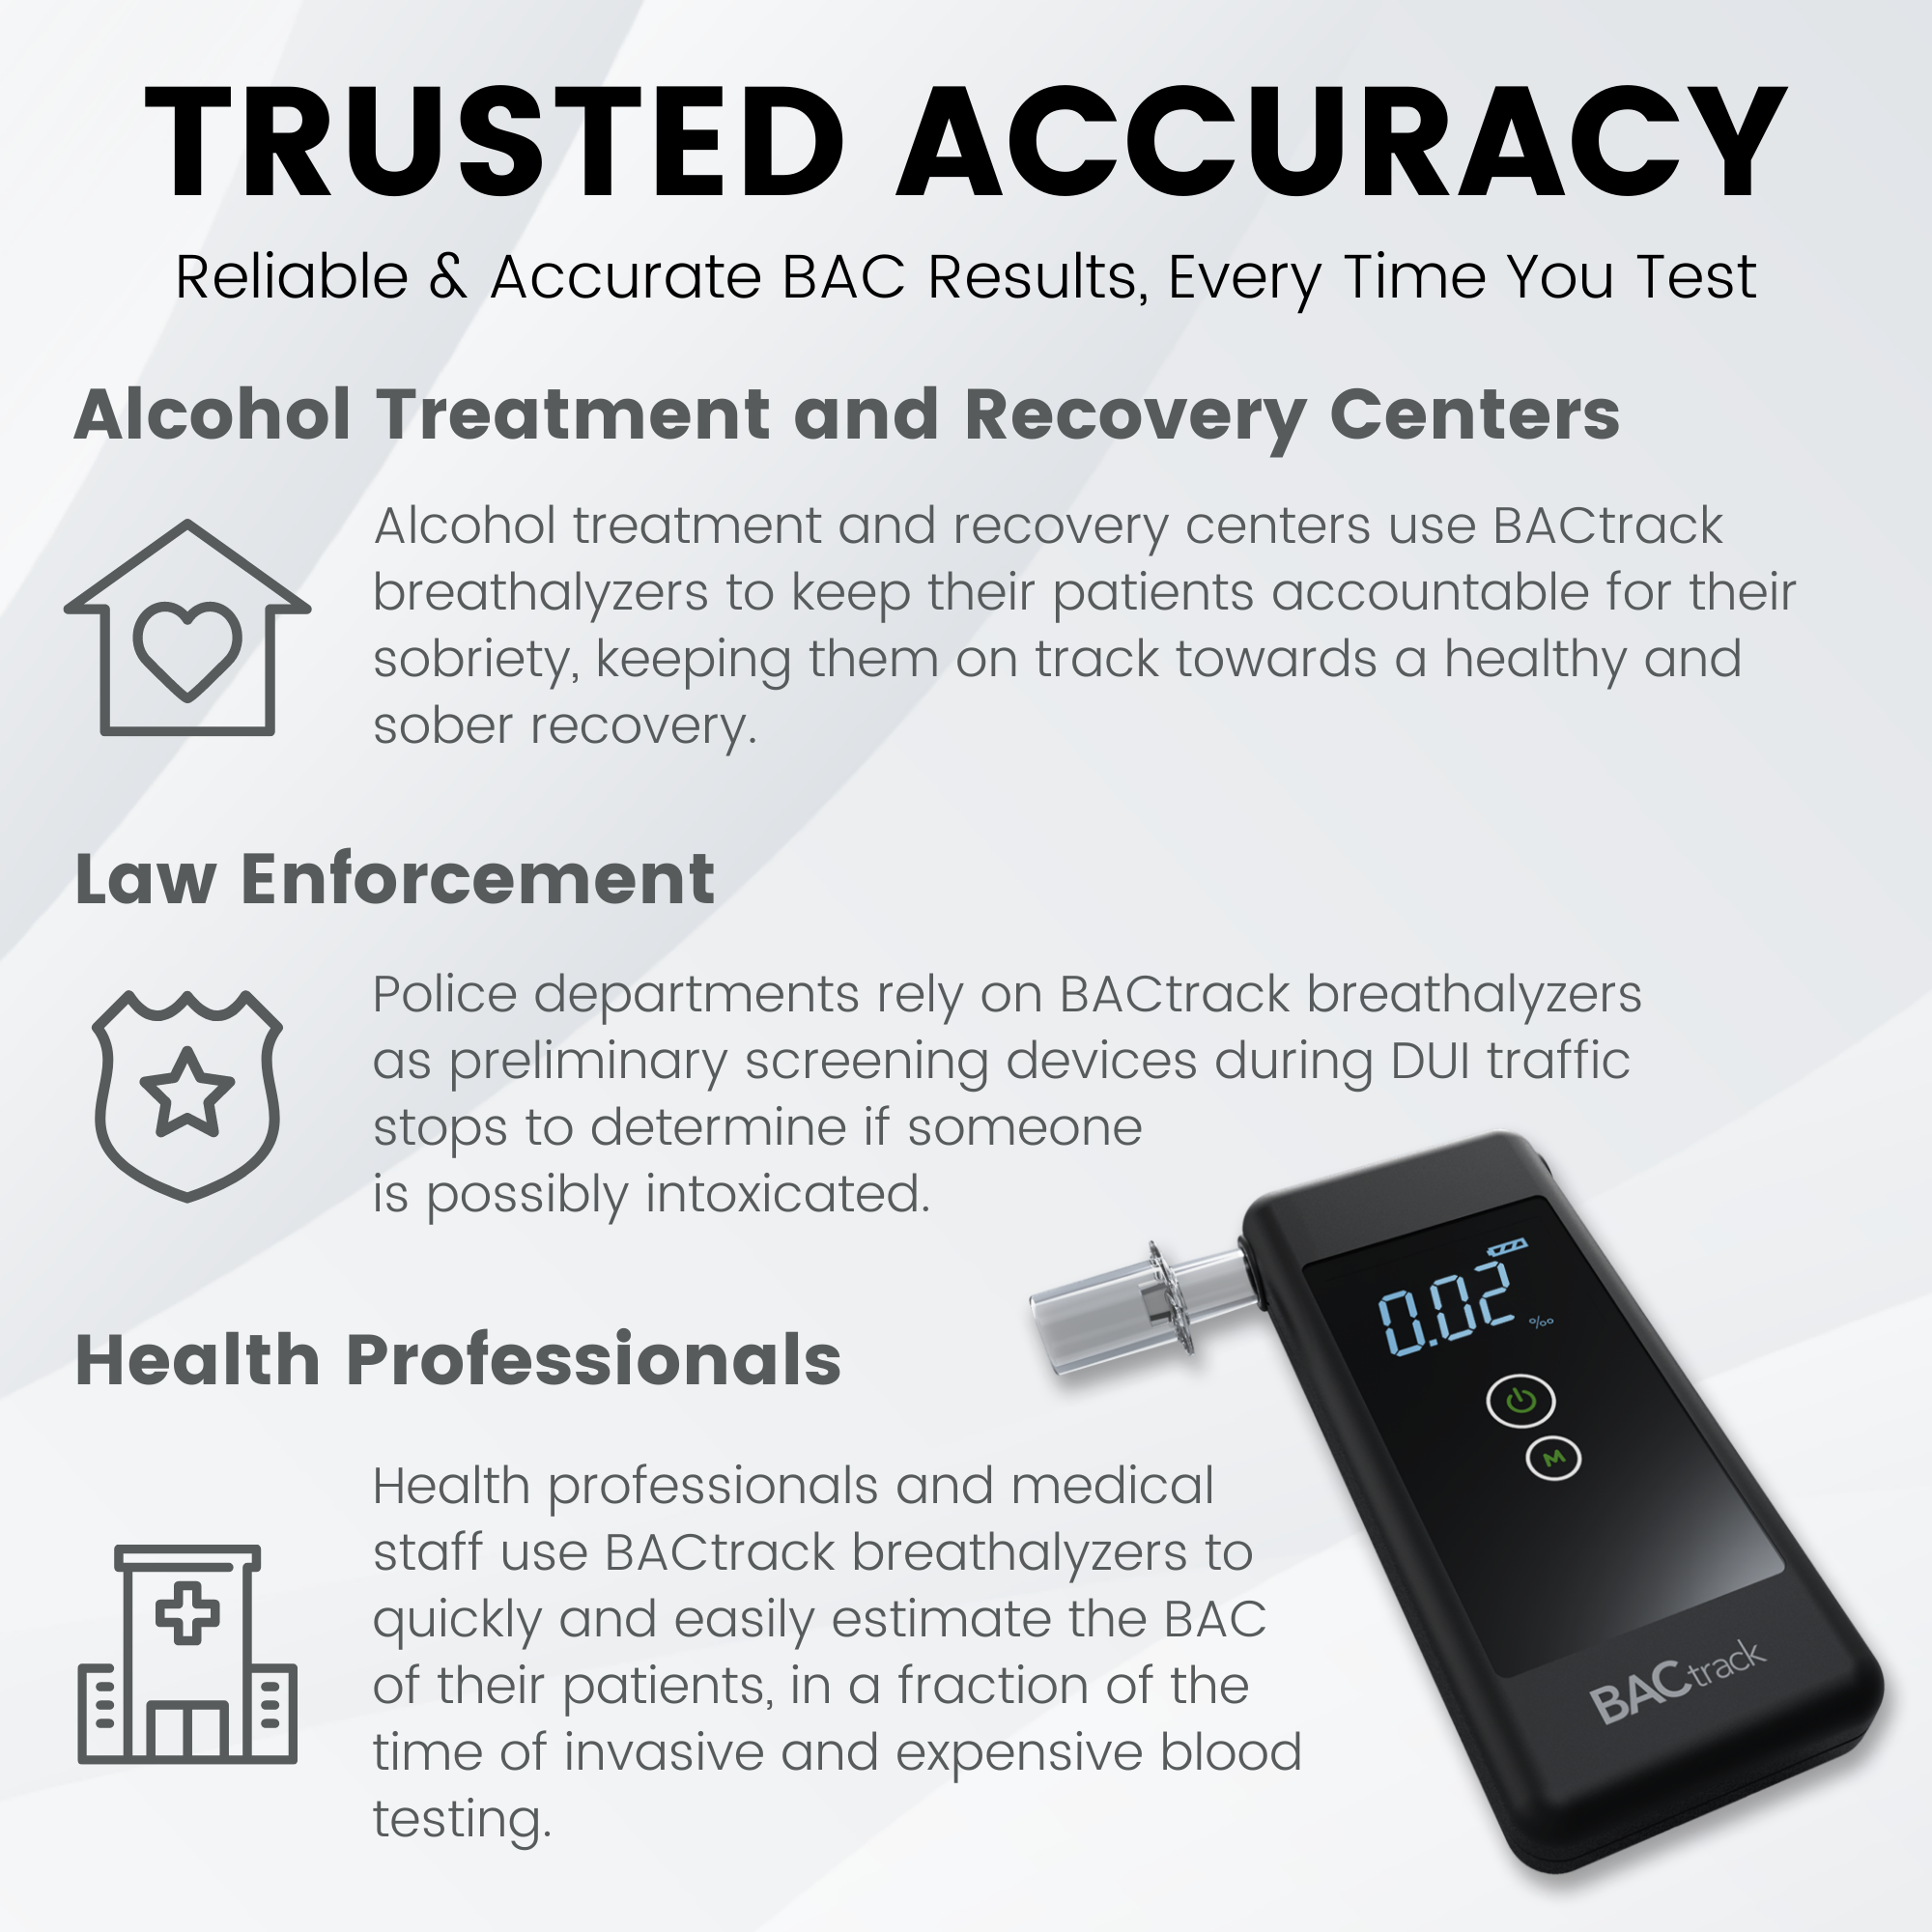 BACtrack Trace Breathalyzer | Professional-Grade Accuracy | DOT & NHTSA Compliant | Portable Breath Alcohol Tester for Personal & Professional Use - image 3 of 9